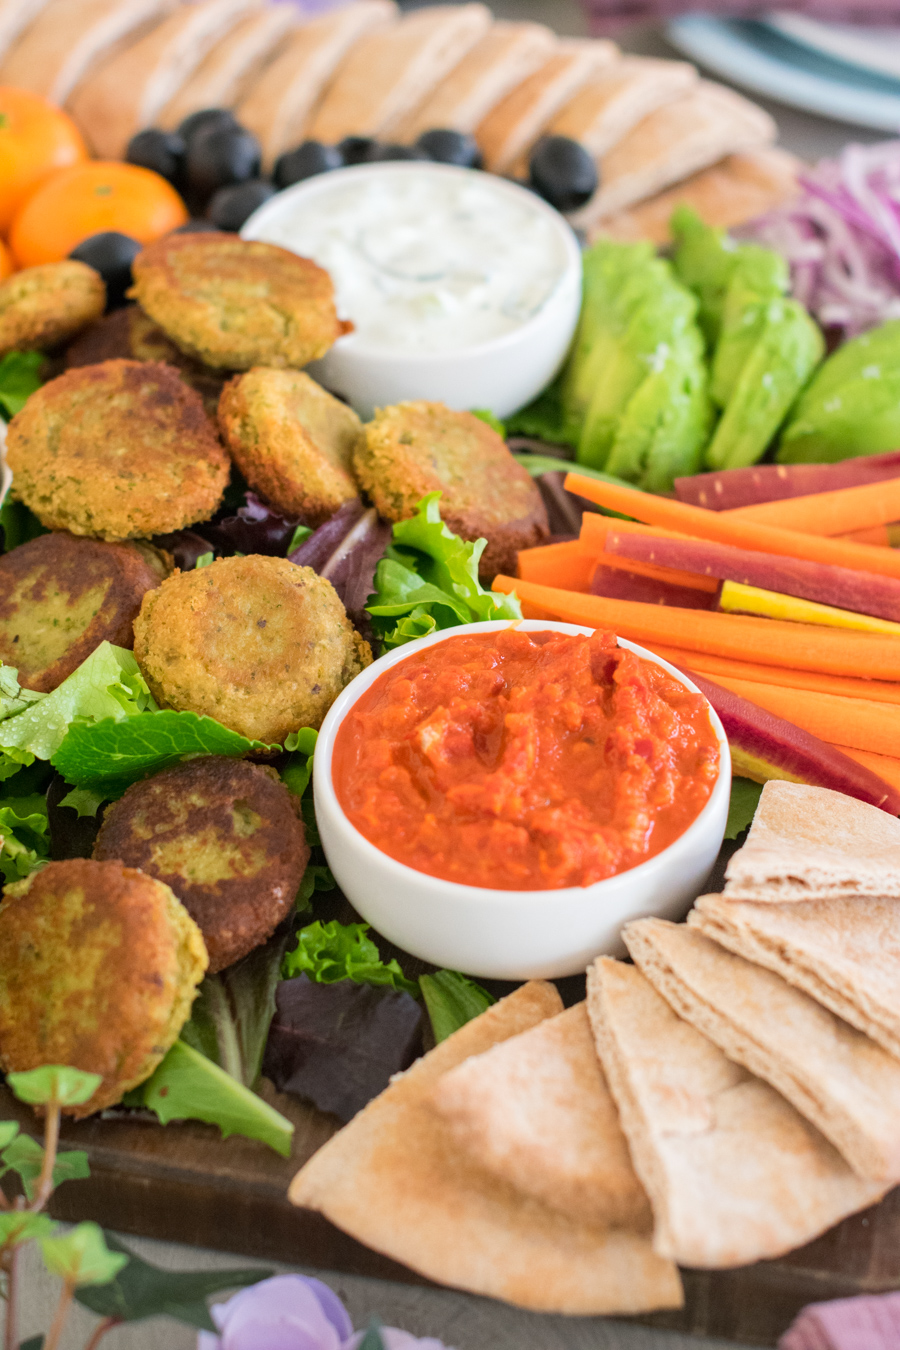 Falafel with vegetables and dips from ChefSarahElizabeth.com